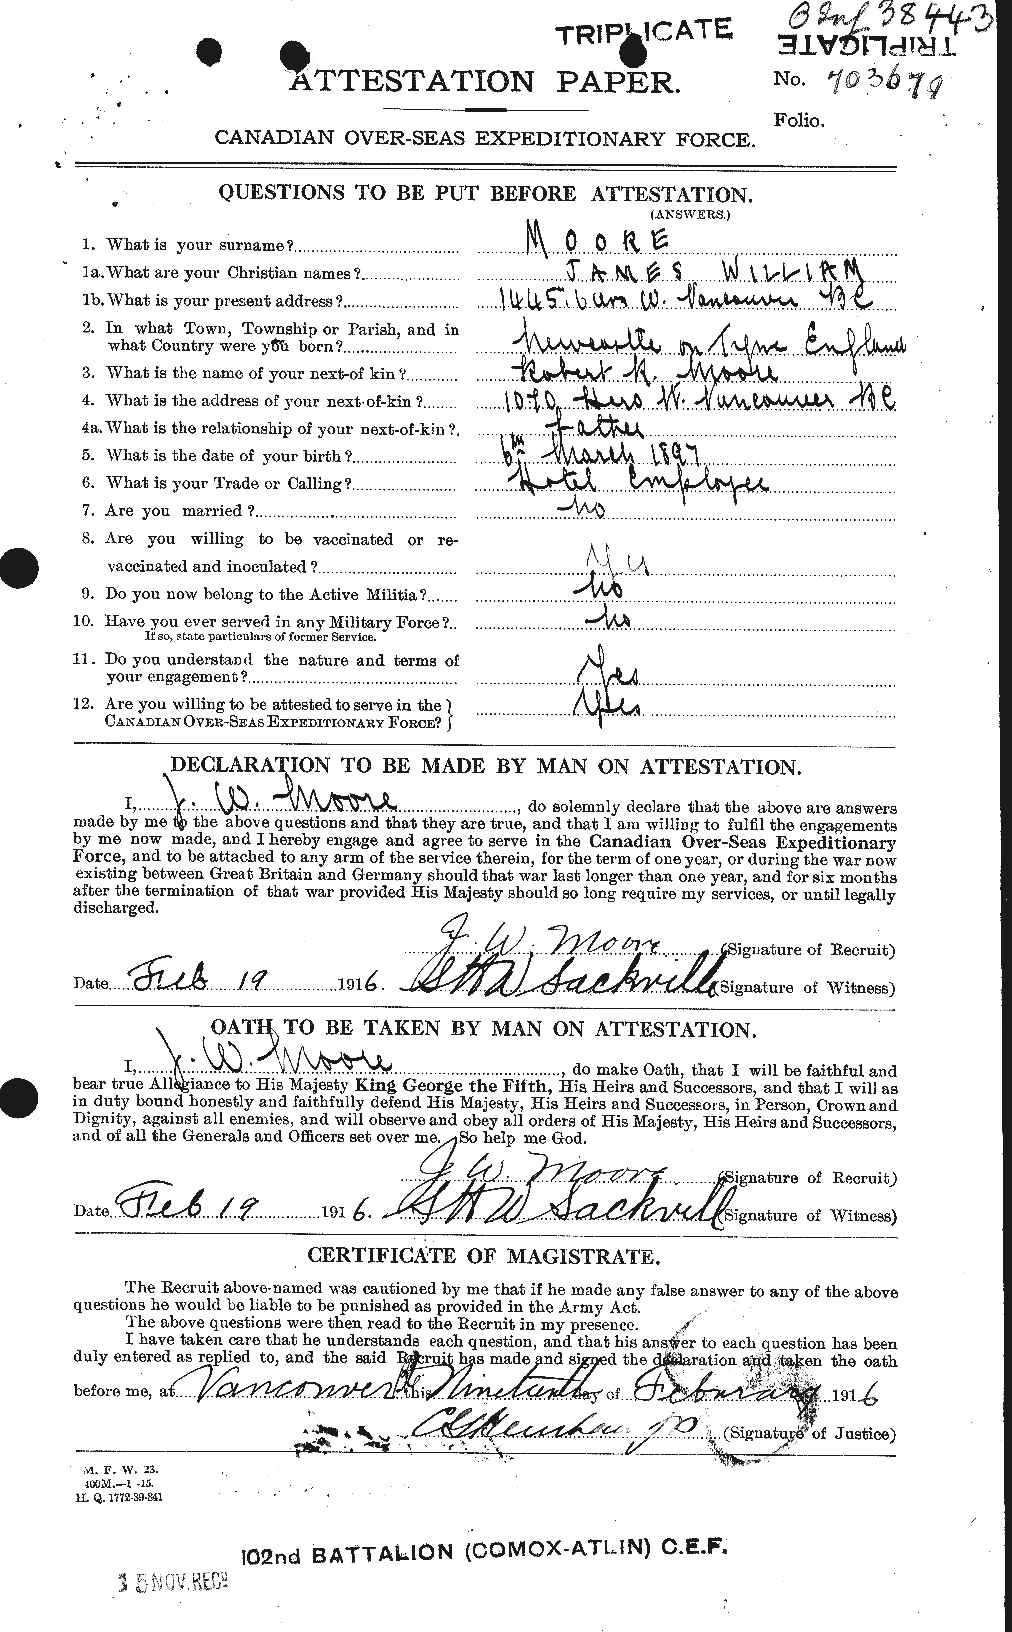 Personnel Records of the First World War - CEF 502241a